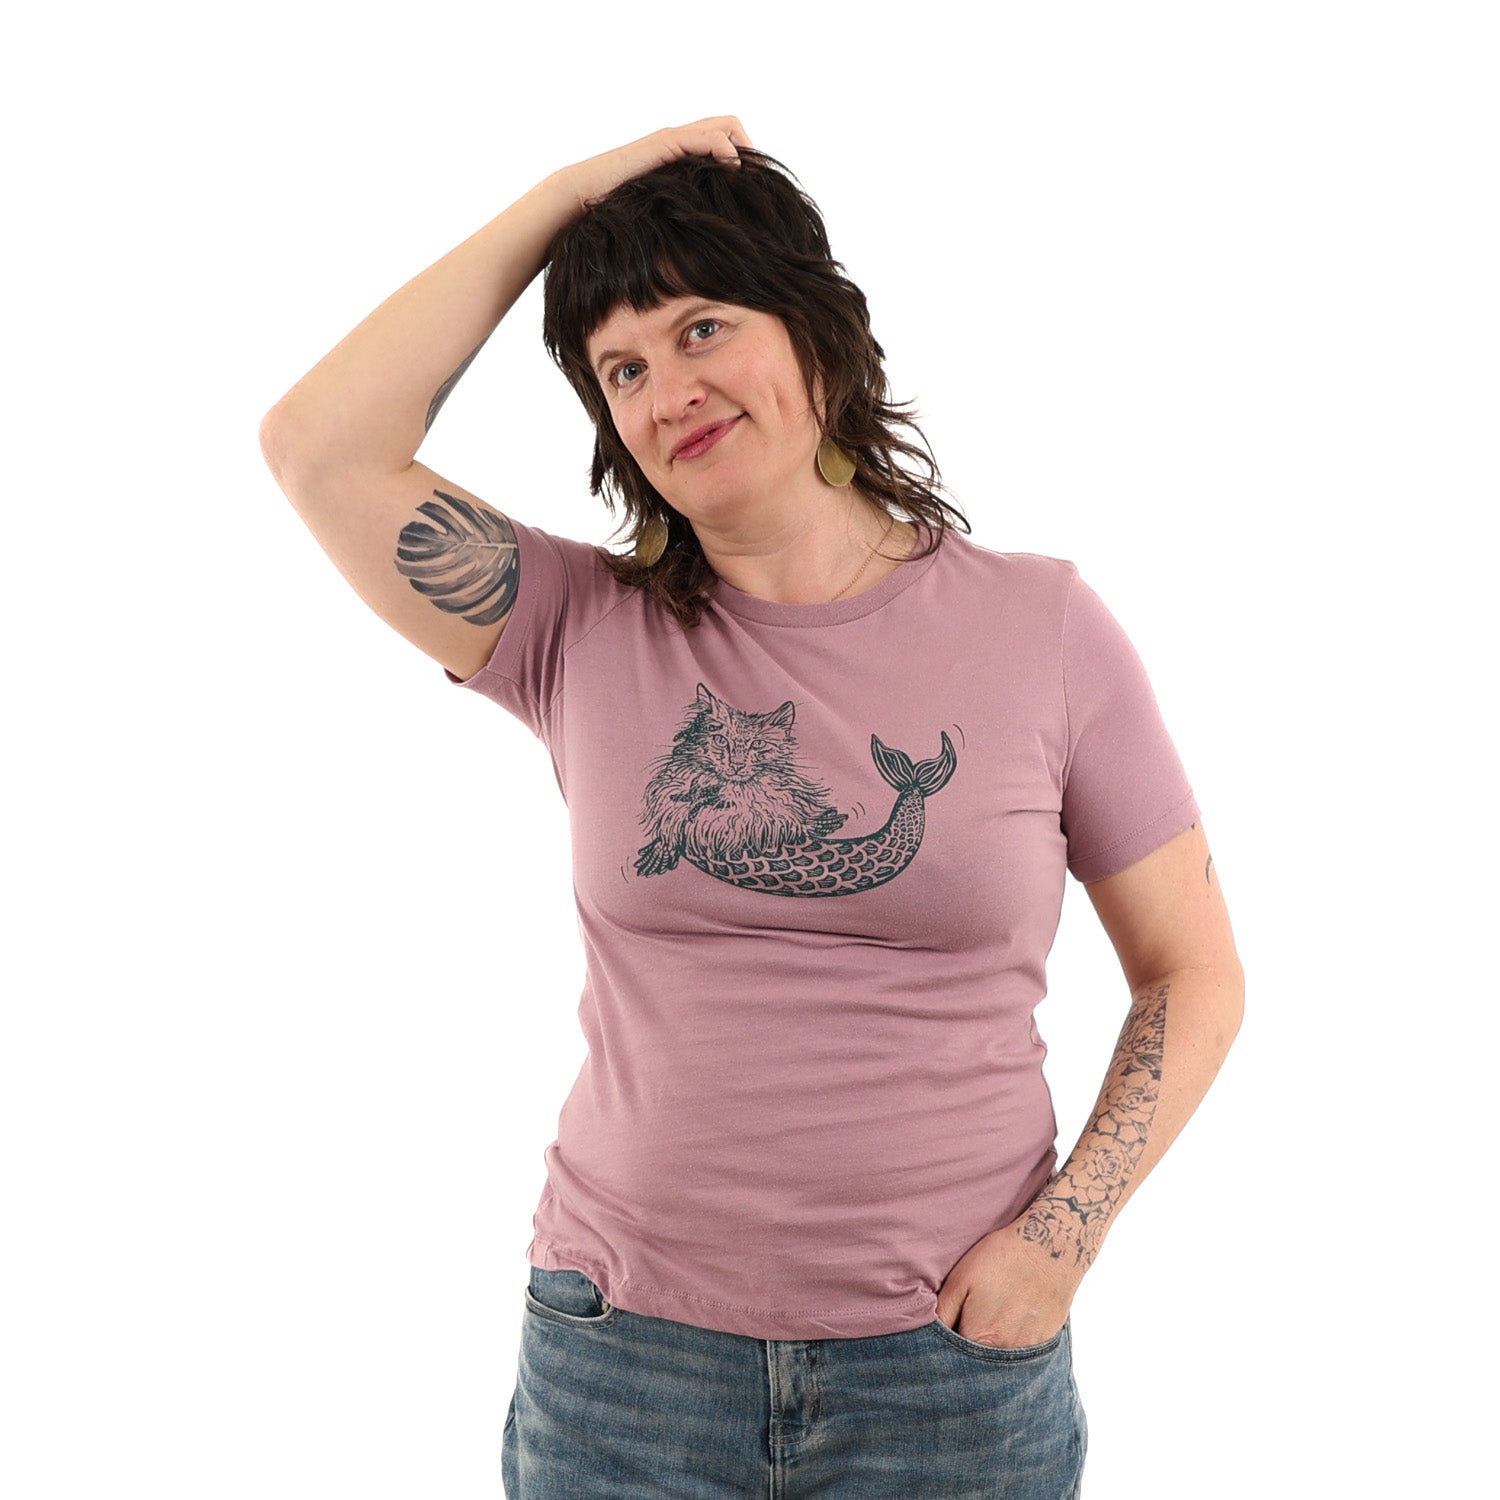 Lady wearing pink shirt with mermaid kitty printed on green ink